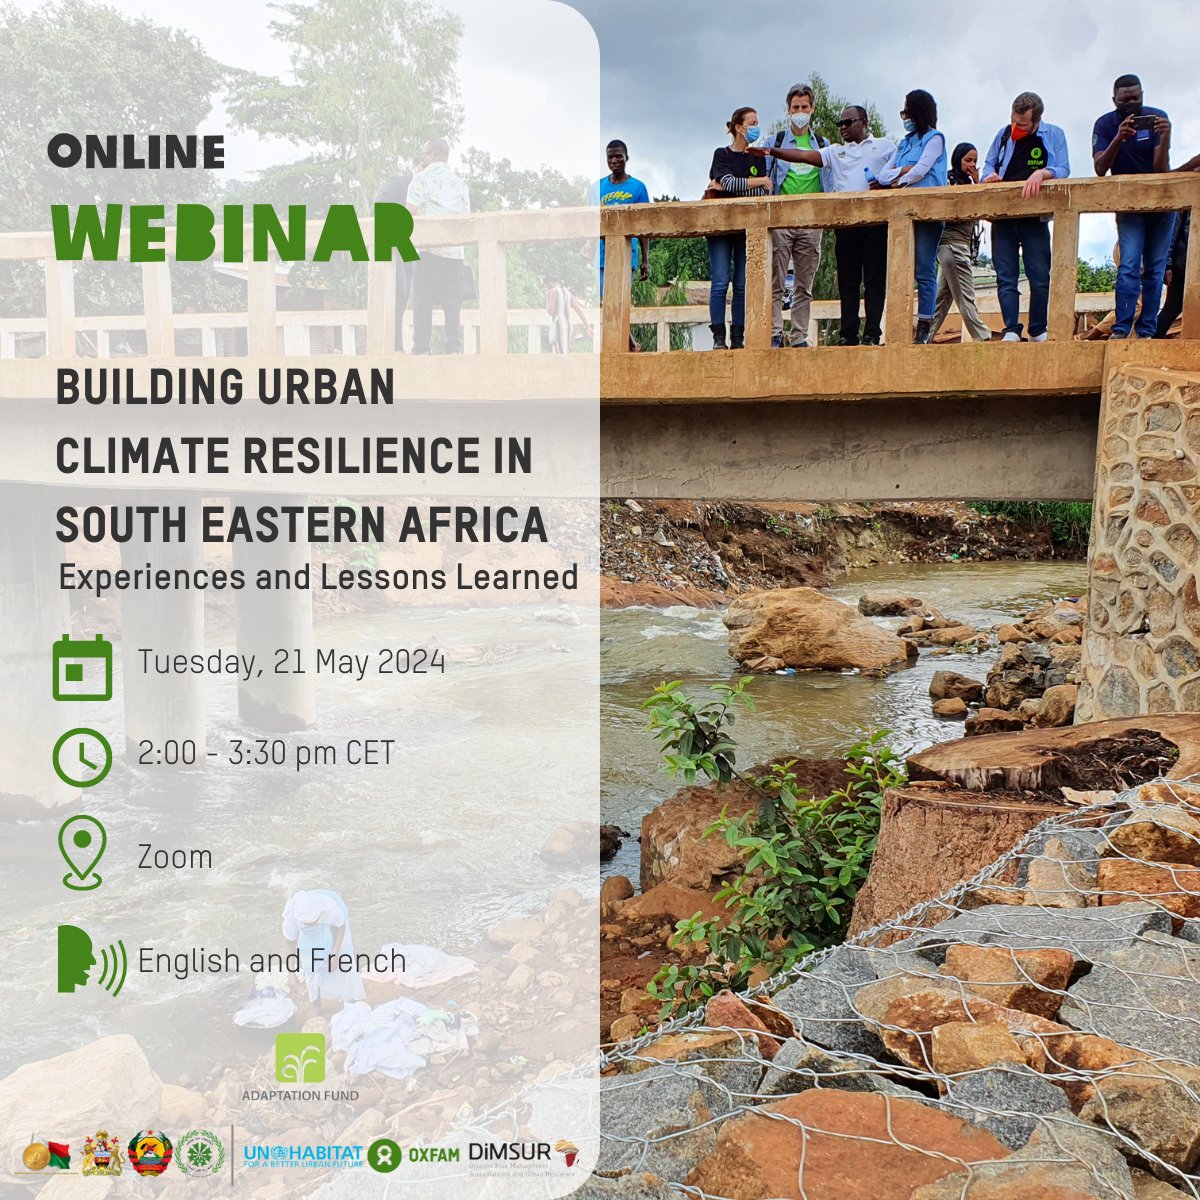 🍃 Join us for a webinar on urban #ClimateResilience ! Learn about our project in South Eastern Africa. From drainage to early warning systems, join the conversation on building a more resilient future. Register now ➡️ us06web.zoom.us/j/83162051949